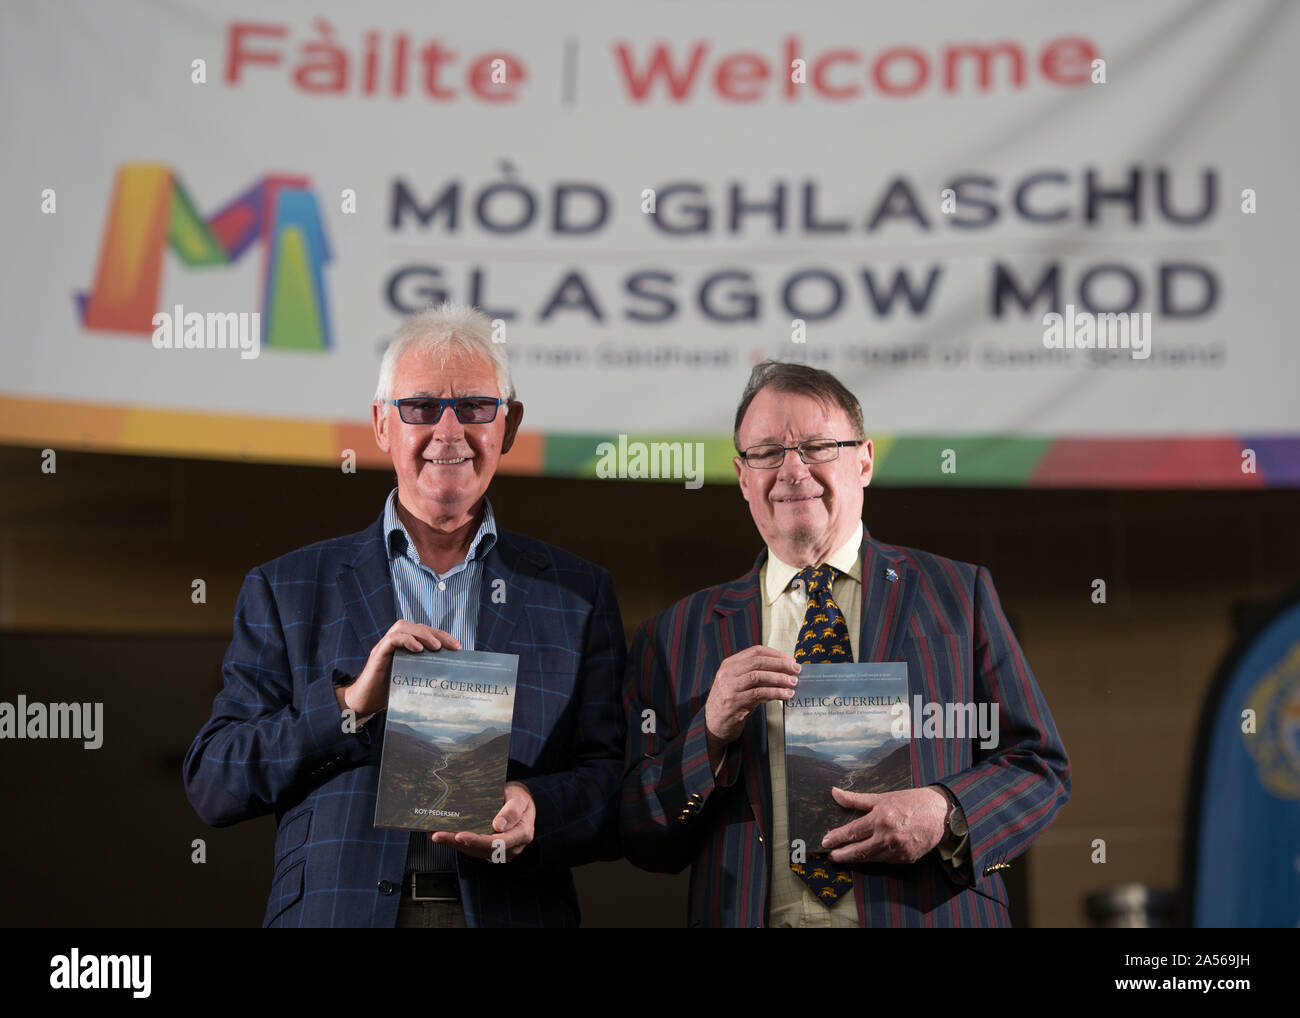 Glasgow, 17 October 2019. Pictured: (left) John Angus Mackay, and, (right) Roy Pedersen. Language Activist John Angus Mackay became well known as the ‘Gaelic Guerrilla’ because of his outstanding ability to campaign effectively through advocacy, influence, pressure and persuasion. As his biographer Roy Pedersen says, Mackay deployed ‘phycology, subterfuge, persuasion, passion, tenacity and, above all, courage’ in his lifelong battle to save and strengthen the Gaelic tongue and culture. Credit: Colin D Fisher/CDFIMAGES.COM Stock Photo